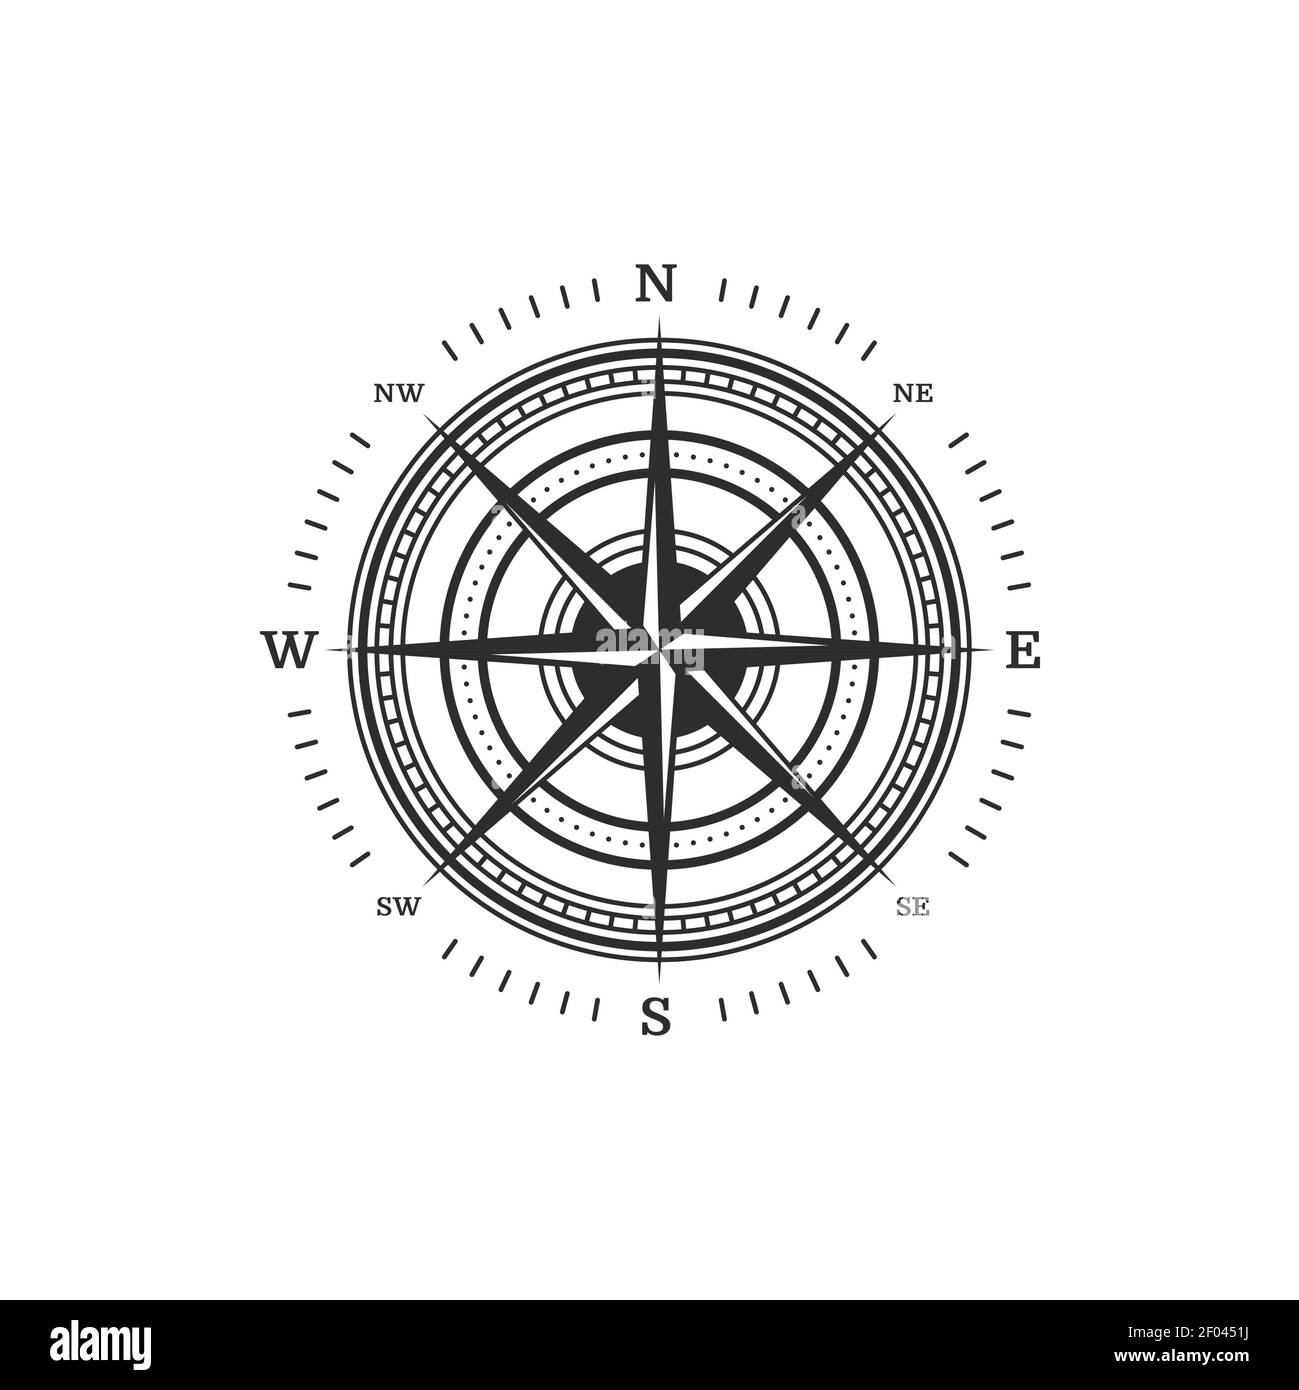 Wind rose Black and White Stock Photos & Images - Alamy